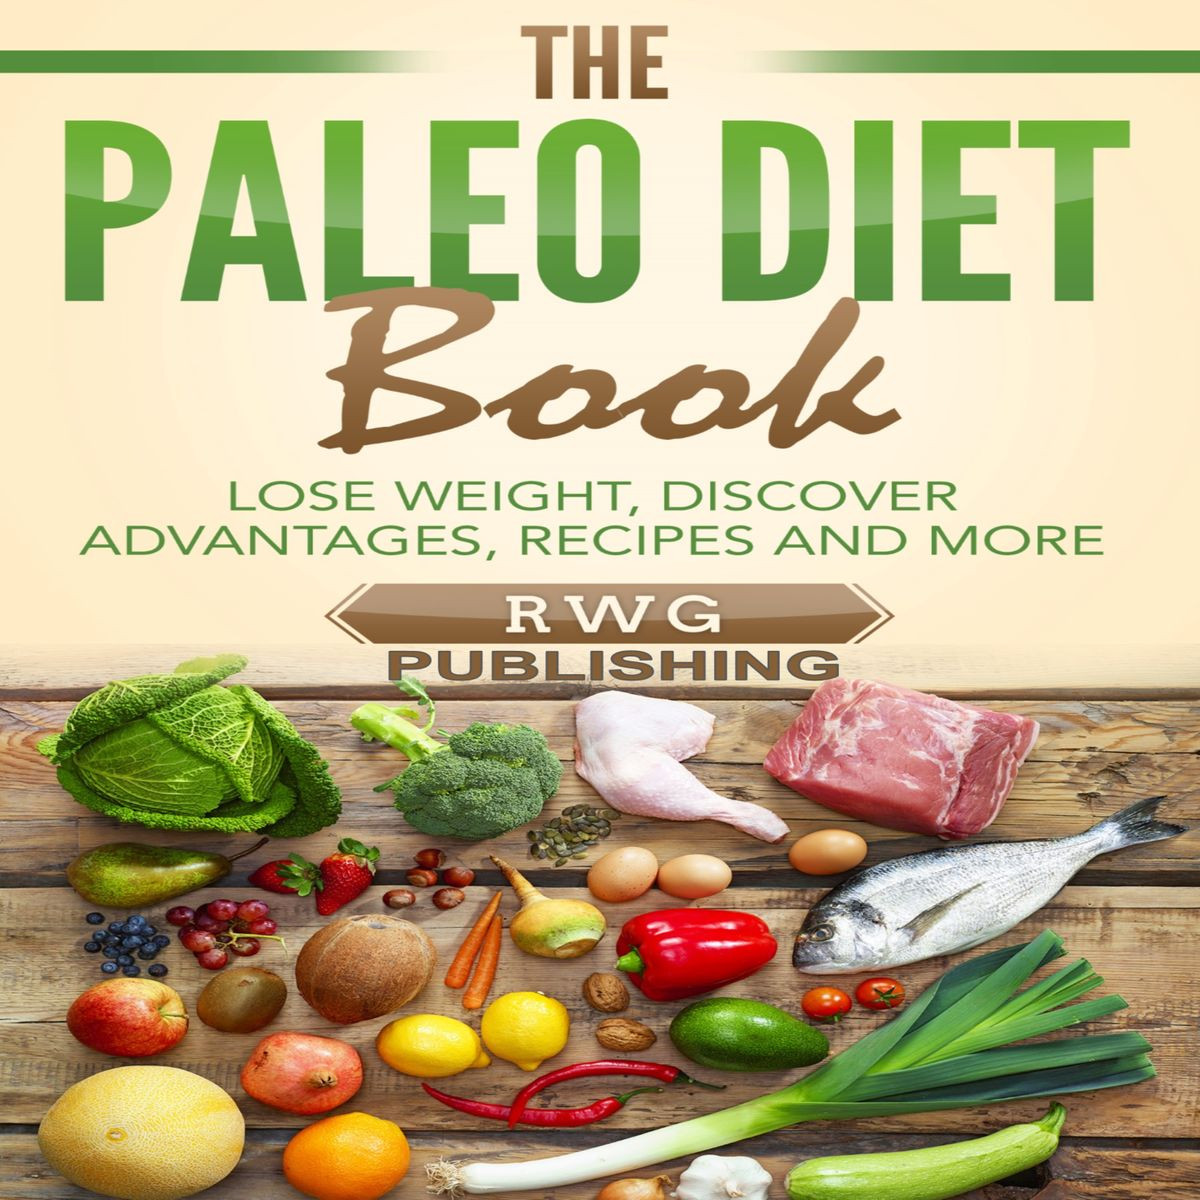 The Paleo Diet Book
 Paleo Diet Book The Audiobook by RWG Publishing